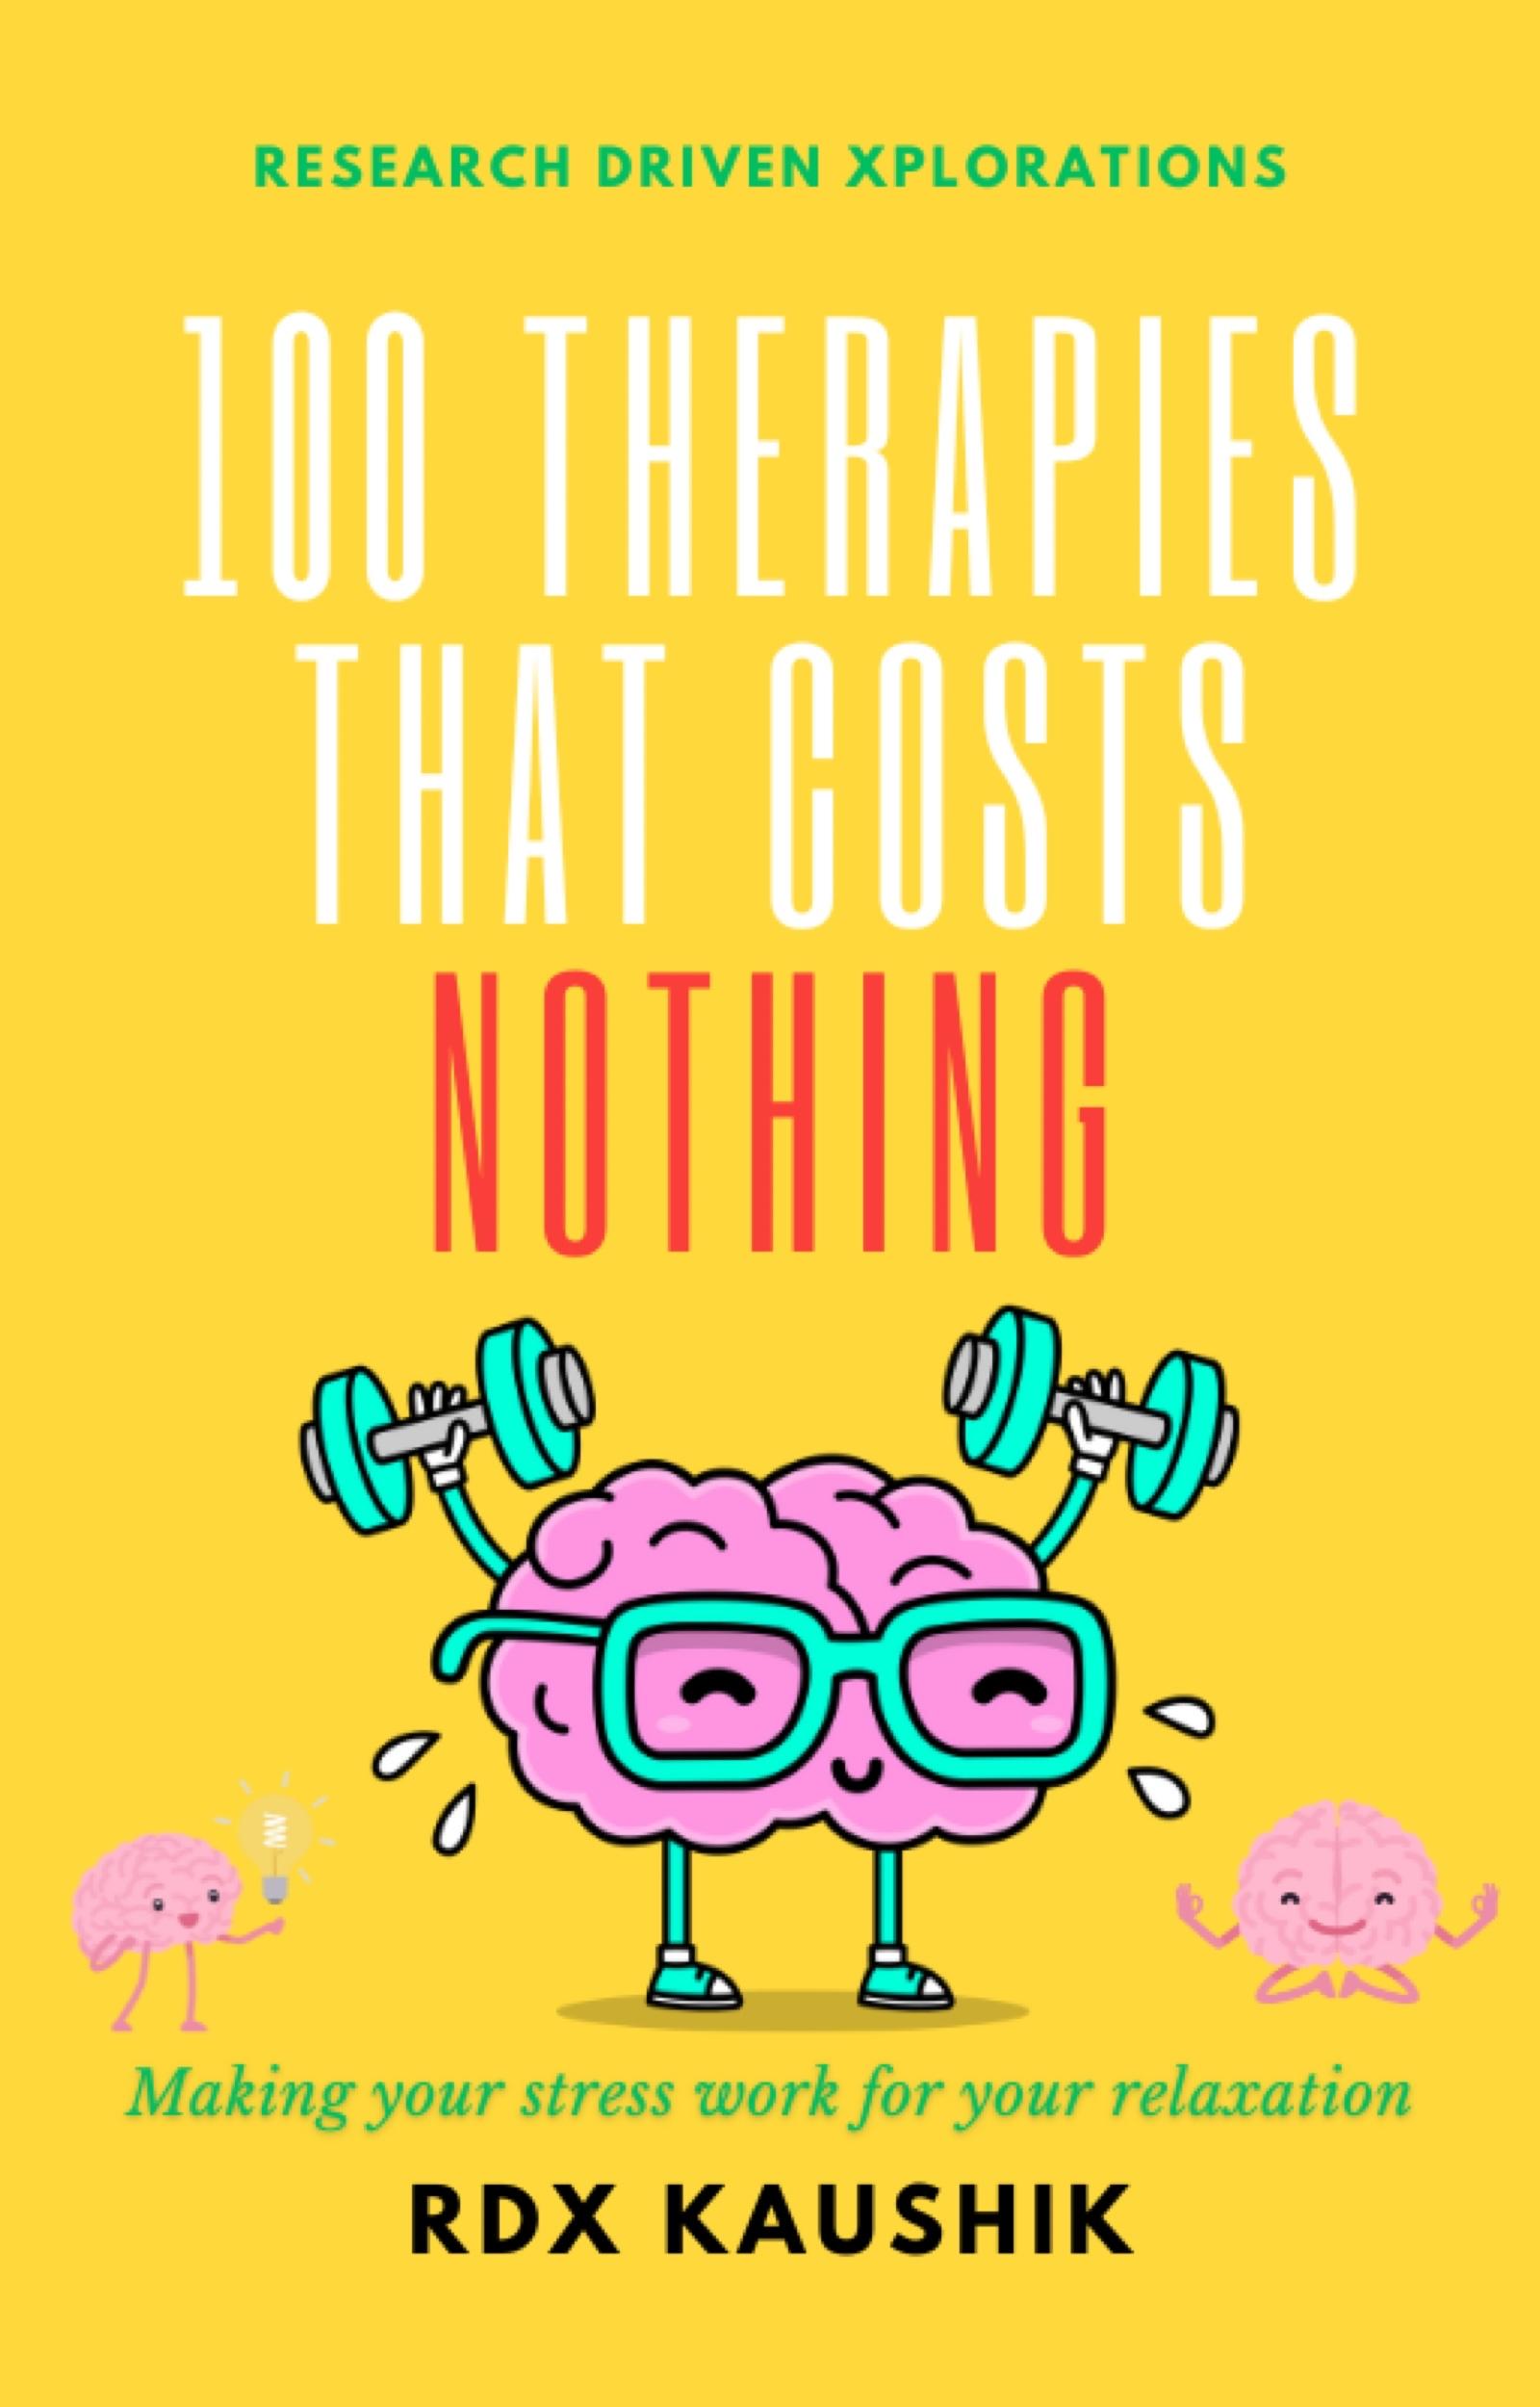 100 Therapies: That Costs Nothing